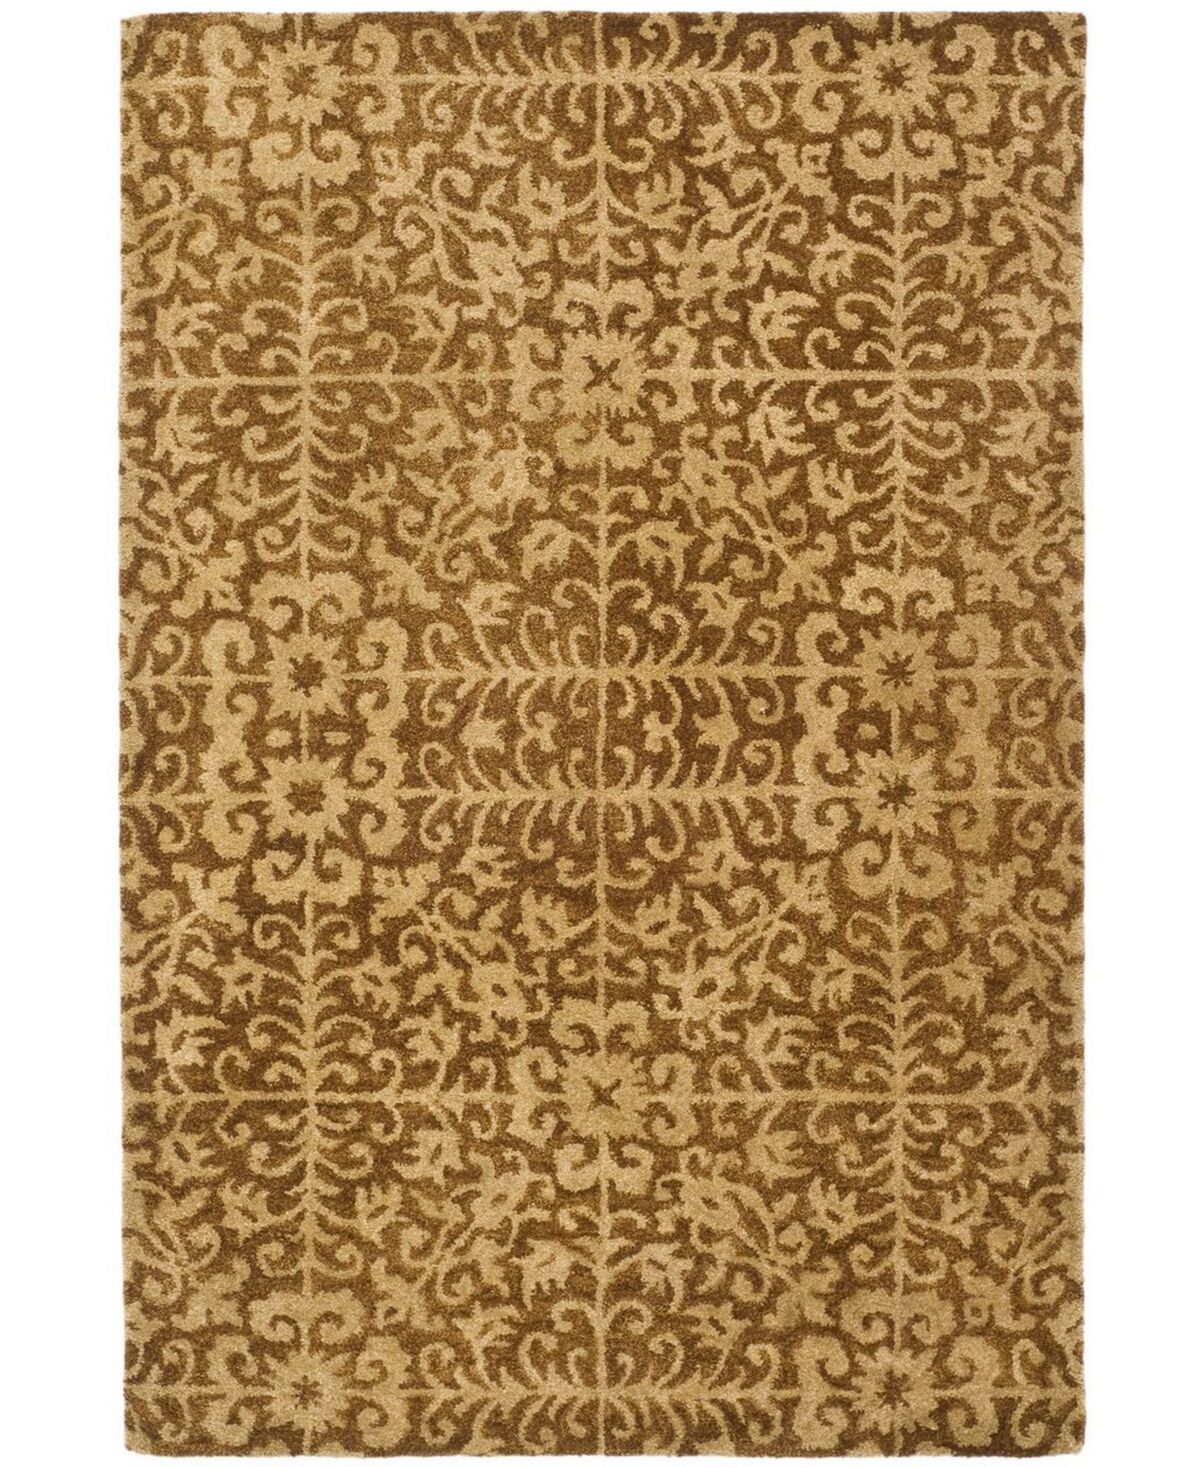 Safavieh Antiquity At411 Gold and Beige 4' x 6' Area Rug - Gold